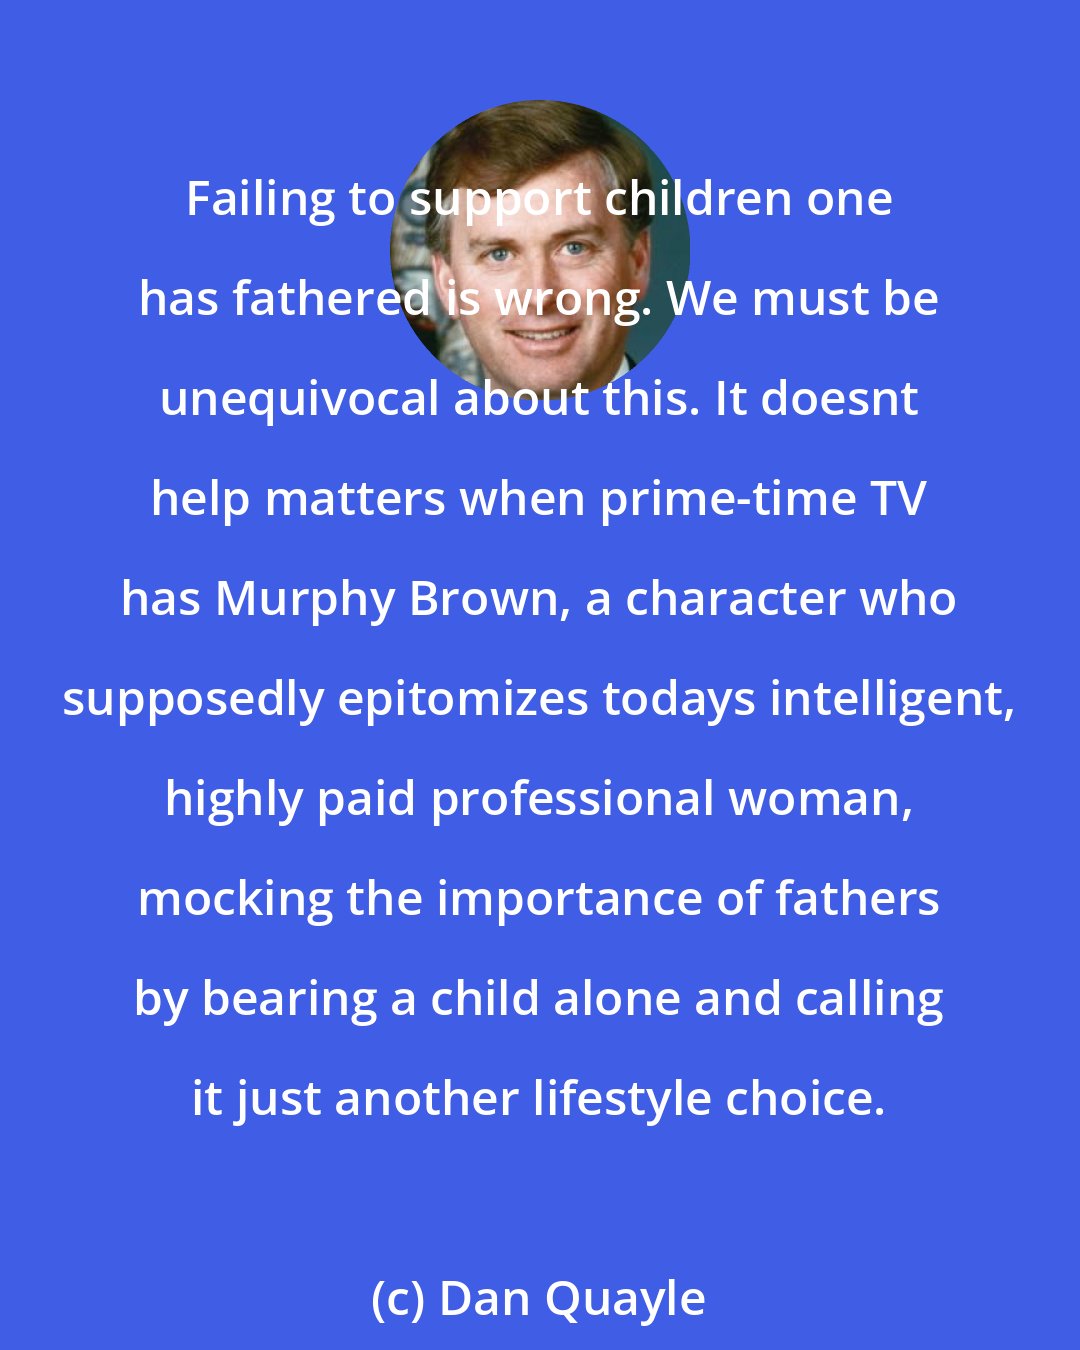 Dan Quayle: Failing to support children one has fathered is wrong. We must be unequivocal about this. It doesnt help matters when prime-time TV has Murphy Brown, a character who supposedly epitomizes todays intelligent, highly paid professional woman, mocking the importance of fathers by bearing a child alone and calling it just another lifestyle choice.